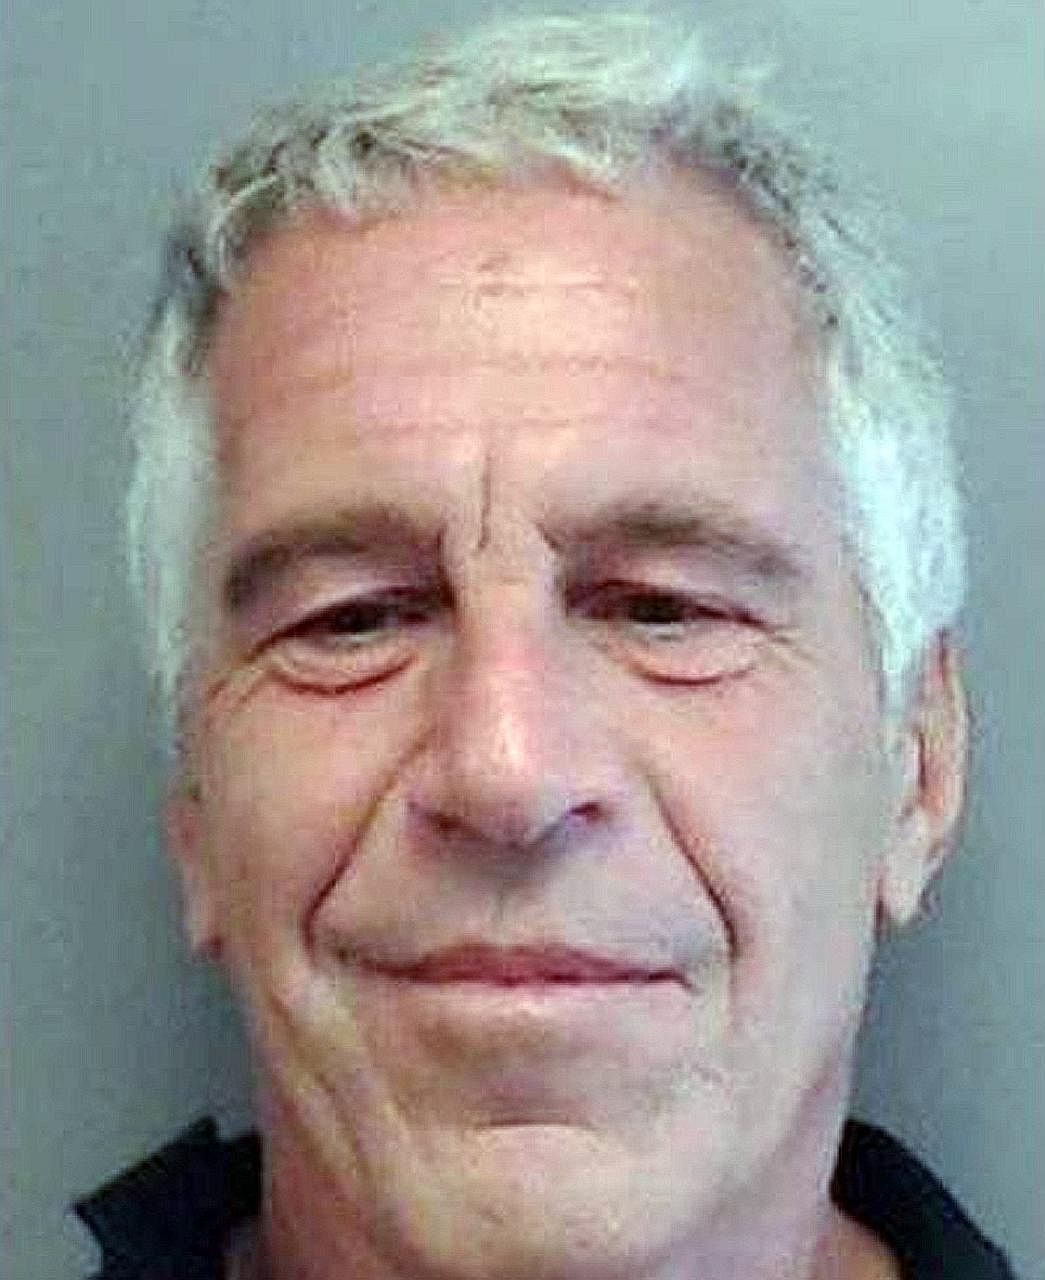 Jeffrey Epstein, accused of paying underage girls for sexual massages a decade ago, had pleaded guilty in a plea deal.